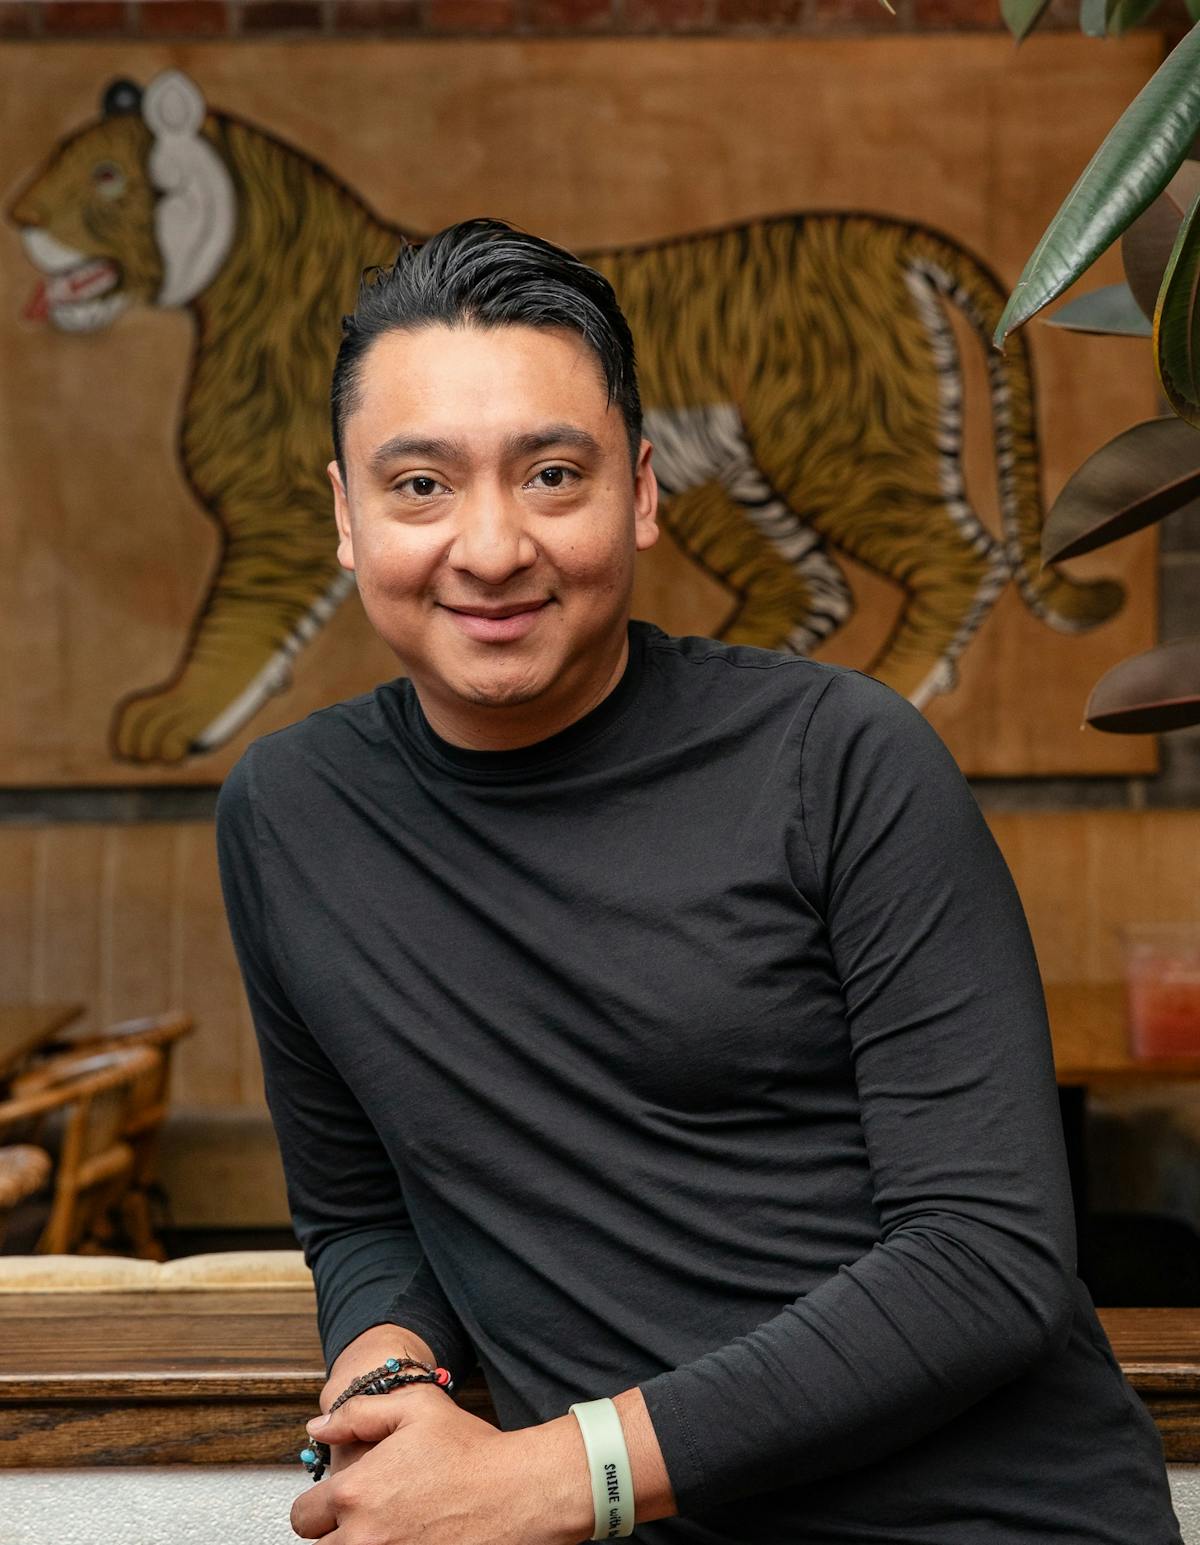 a man with short hair wearing a black long sleeve shirt smiling